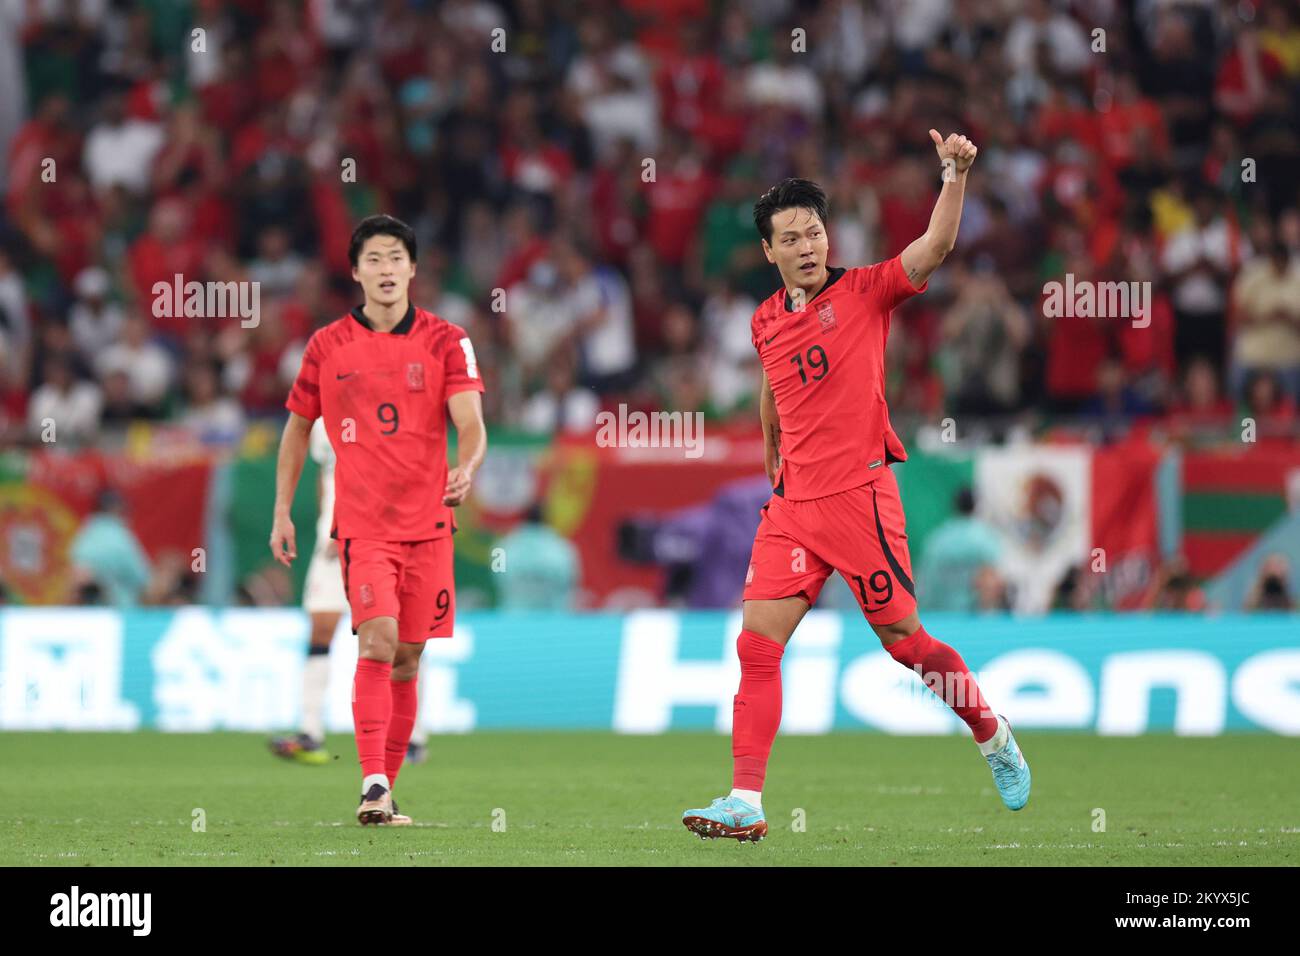 Al Rayyan, Qatar. 2nd Dec, 2022. Kim Young-gwon (R) of South Korea celebrates scoring during the Group H match between South Korea and Portugal at the 2022 FIFA World Cup at Education City Stadium in Al Rayyan, Qatar, Dec. 2, 2022. Credit: Cao Can/Xinhua/Alamy Live News Stock Photo